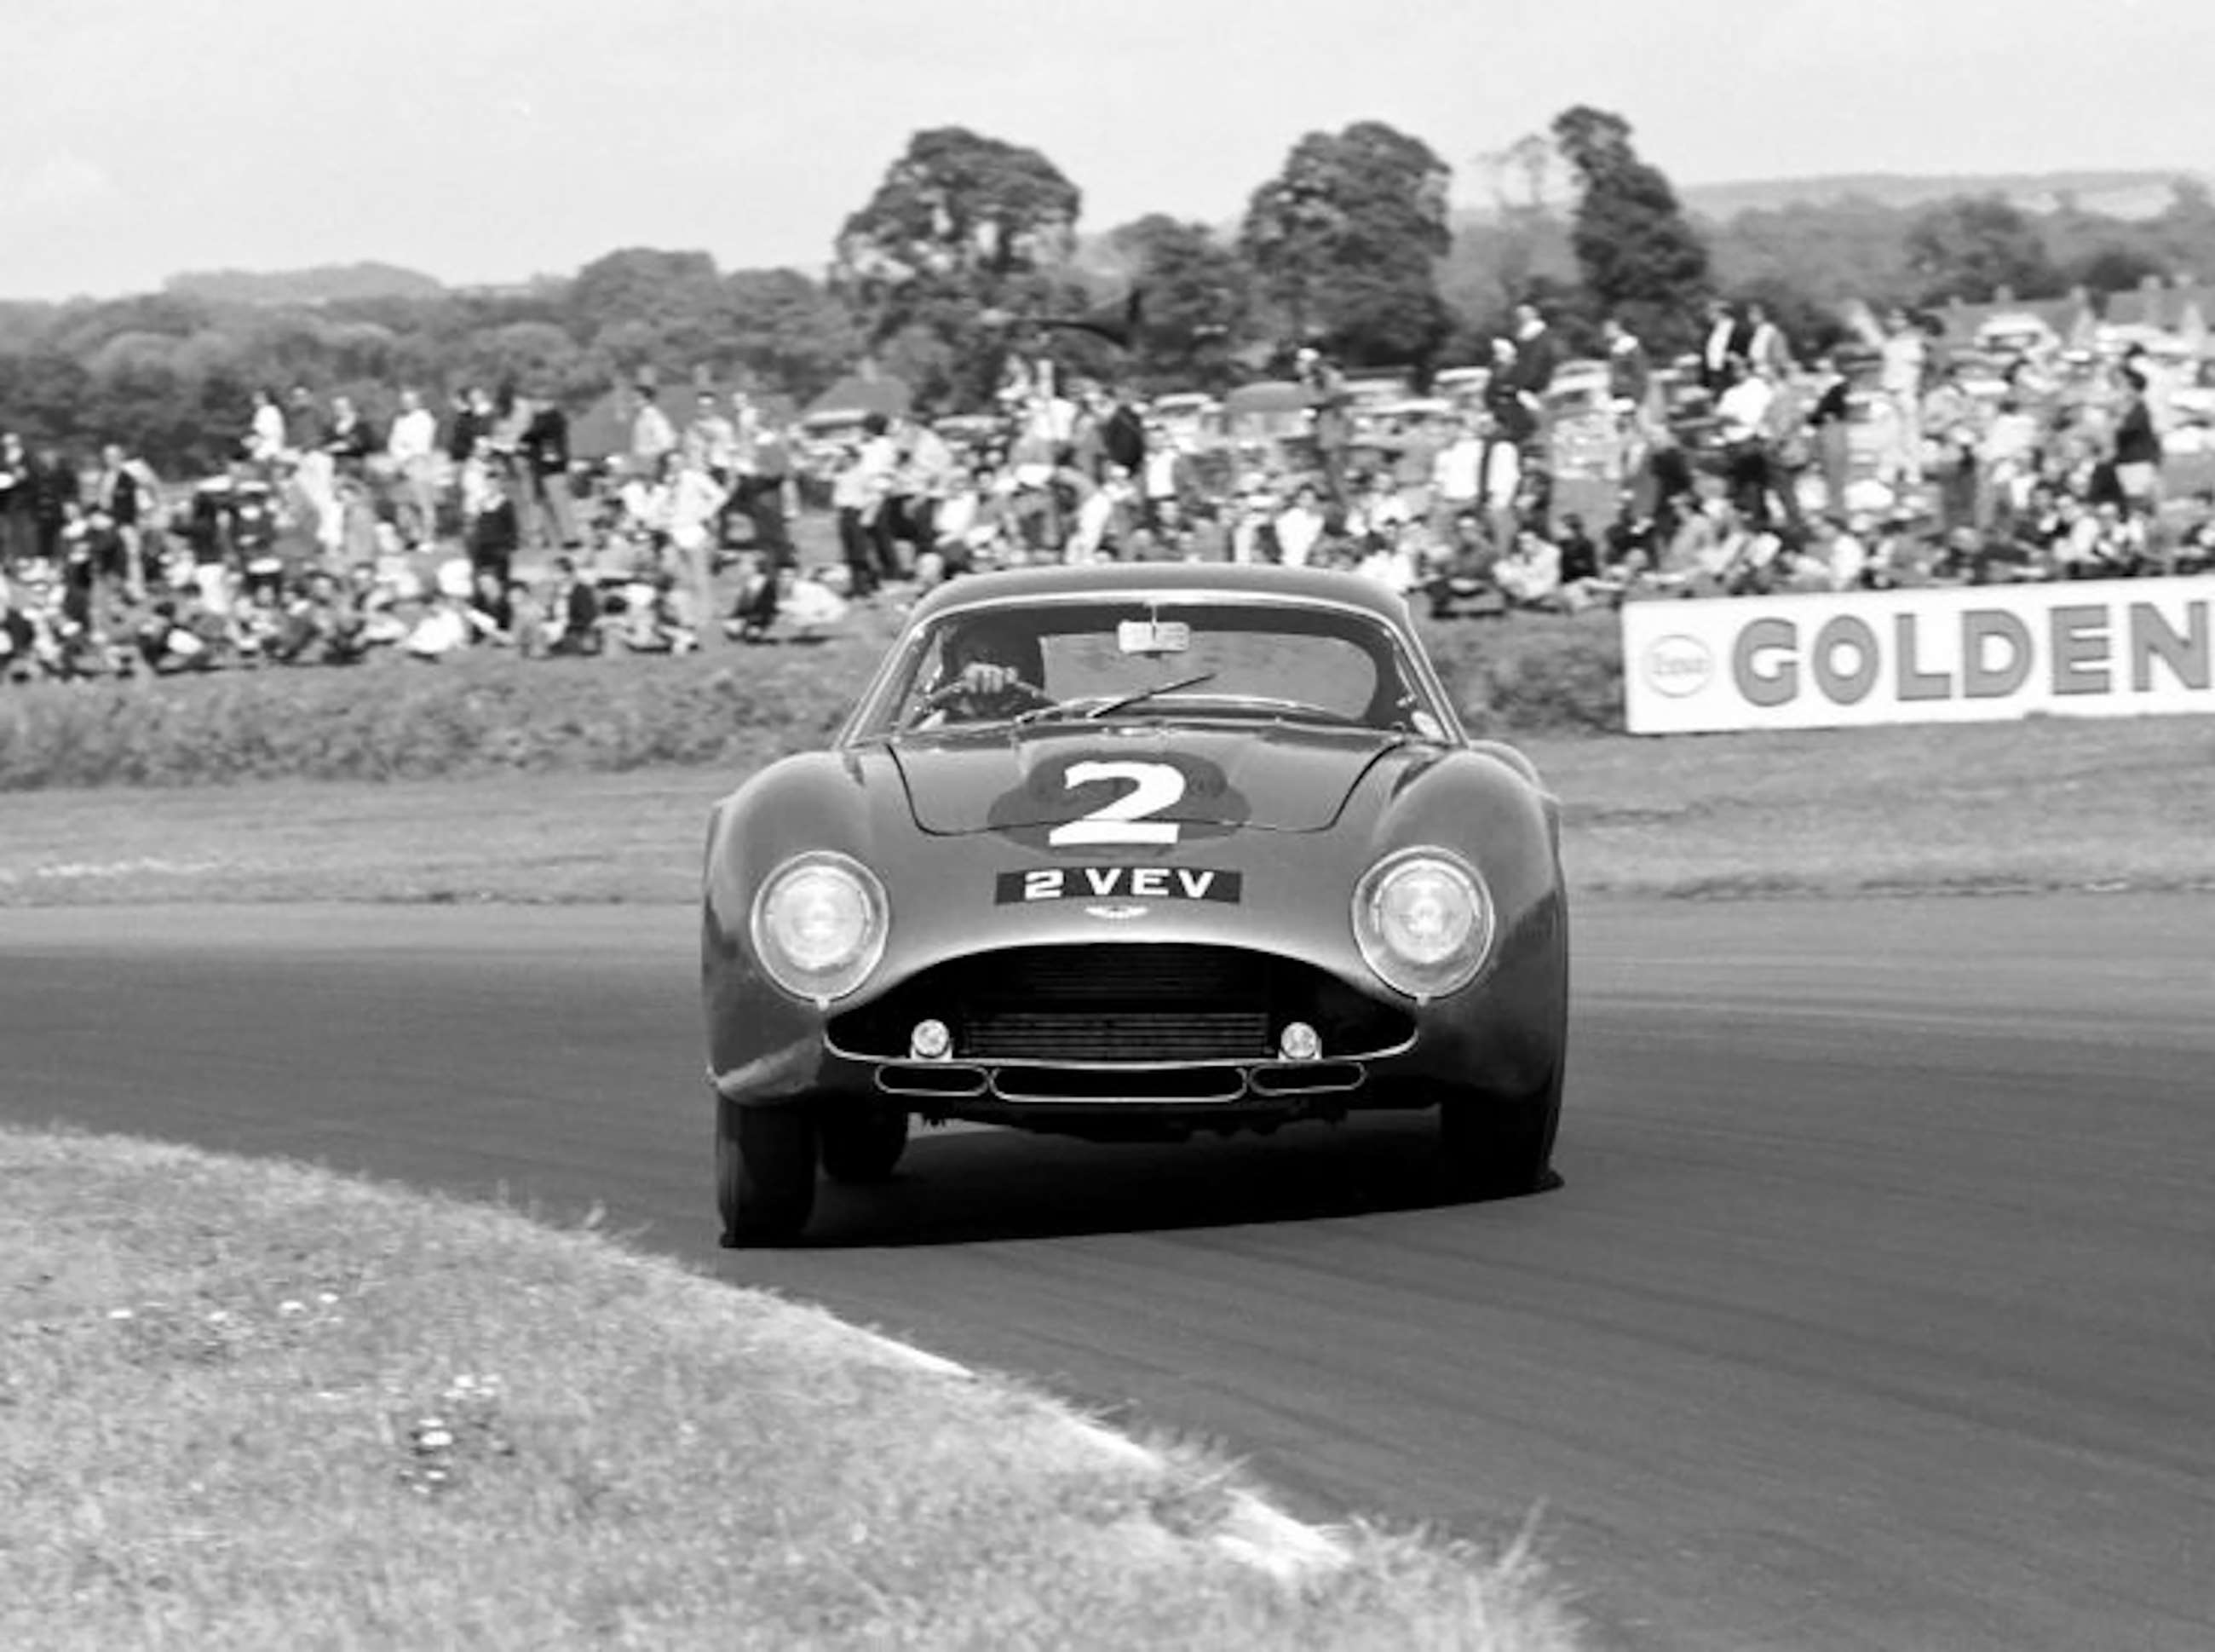 Jimmy in the replacement 1962 ‘2 VEV’ in the 1962 Goodwood TT - aiming for an appointment with John Surtees’ Ferrari 250 GTO… and the Madgwick bank… Spot the ‘MP209’ body differences...